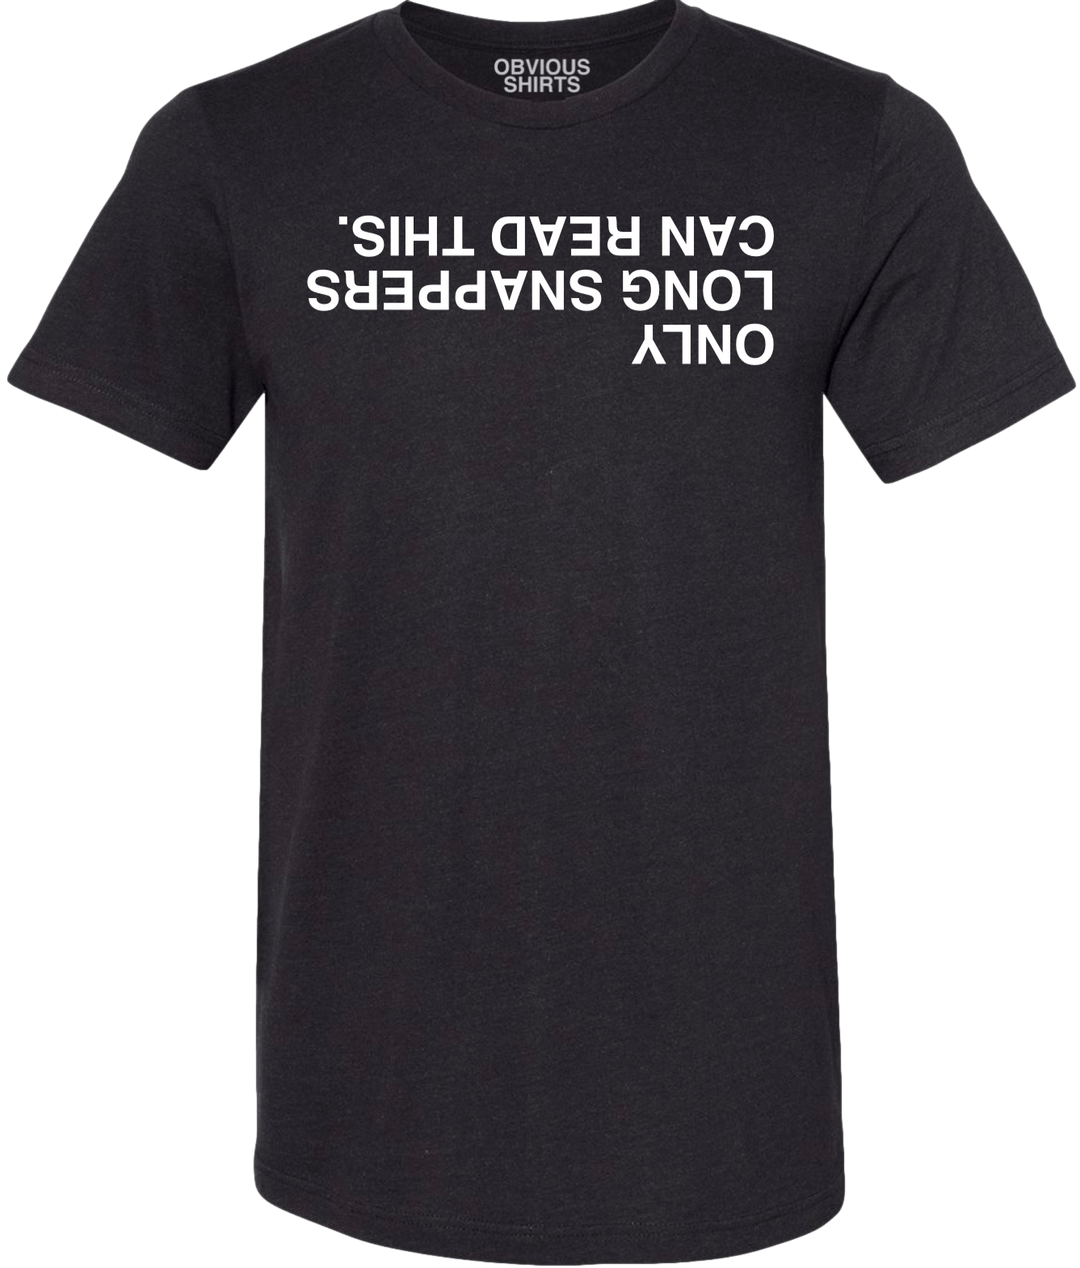 ONLY LONG SNAPPERS CAN READ THIS. (BLACK) - OBVIOUS SHIRTS